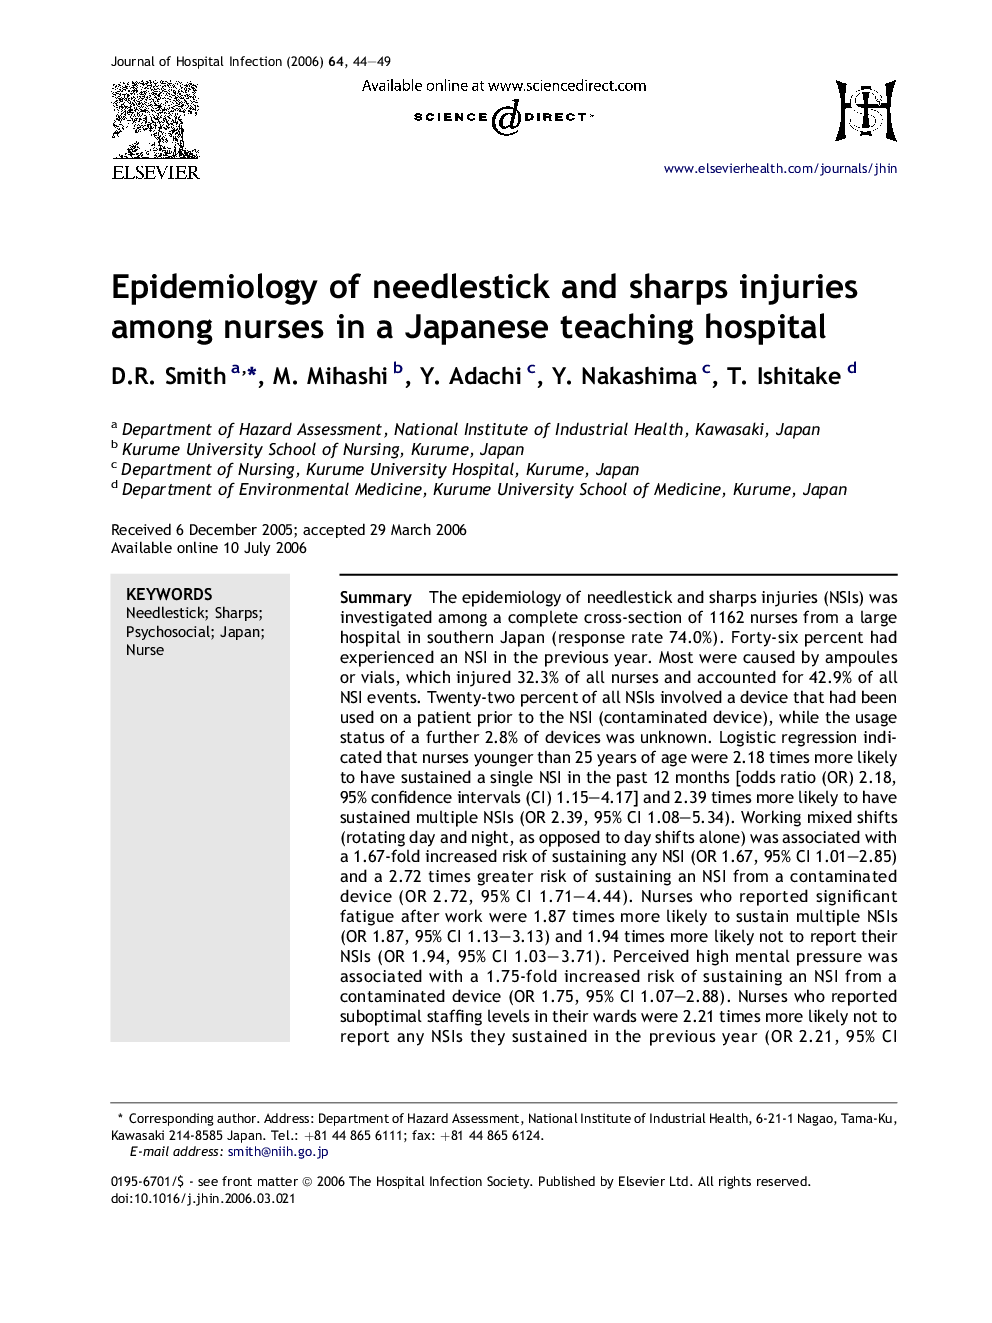 Epidemiology of needlestick and sharps injuries among nurses in a Japanese teaching hospital